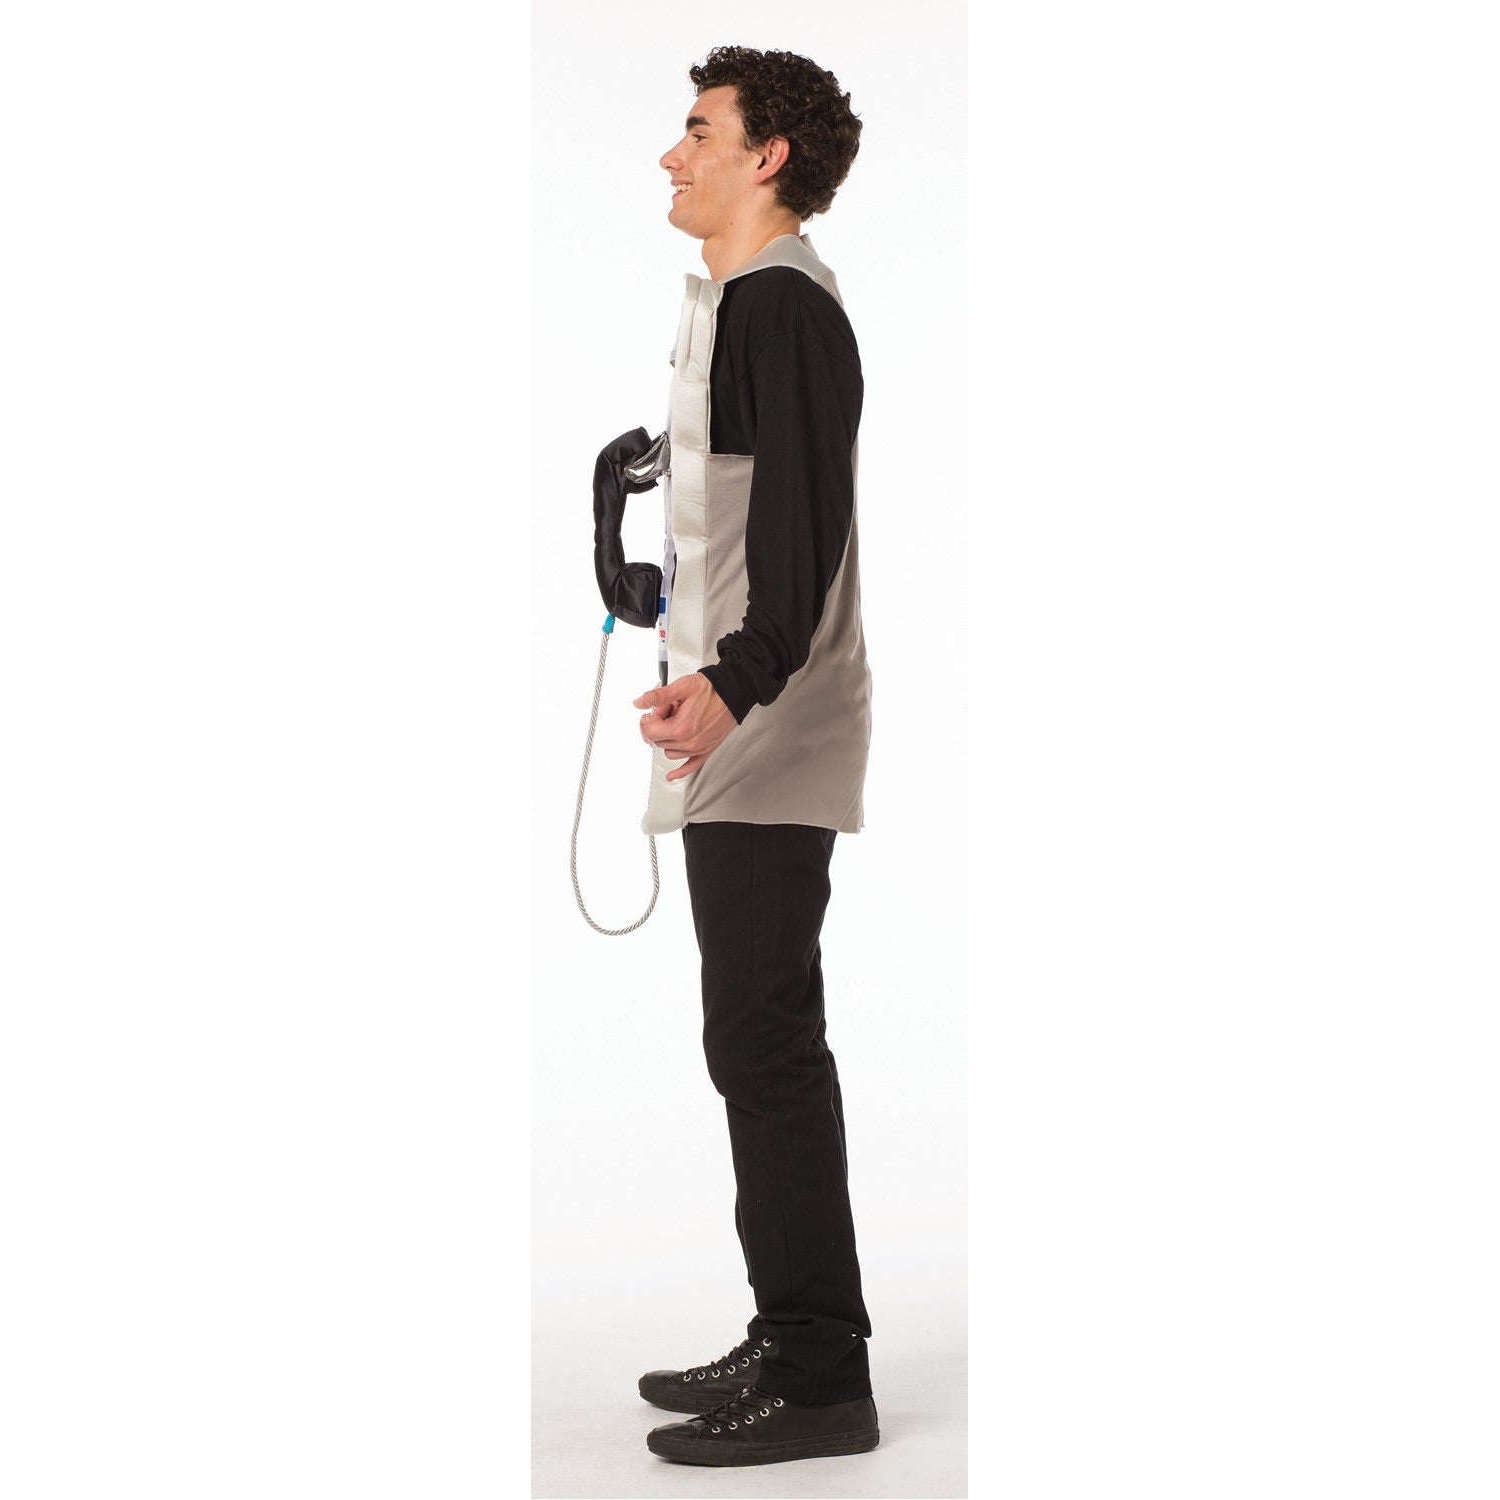 Retro Pay Phone with 3 Rings Adult Costume